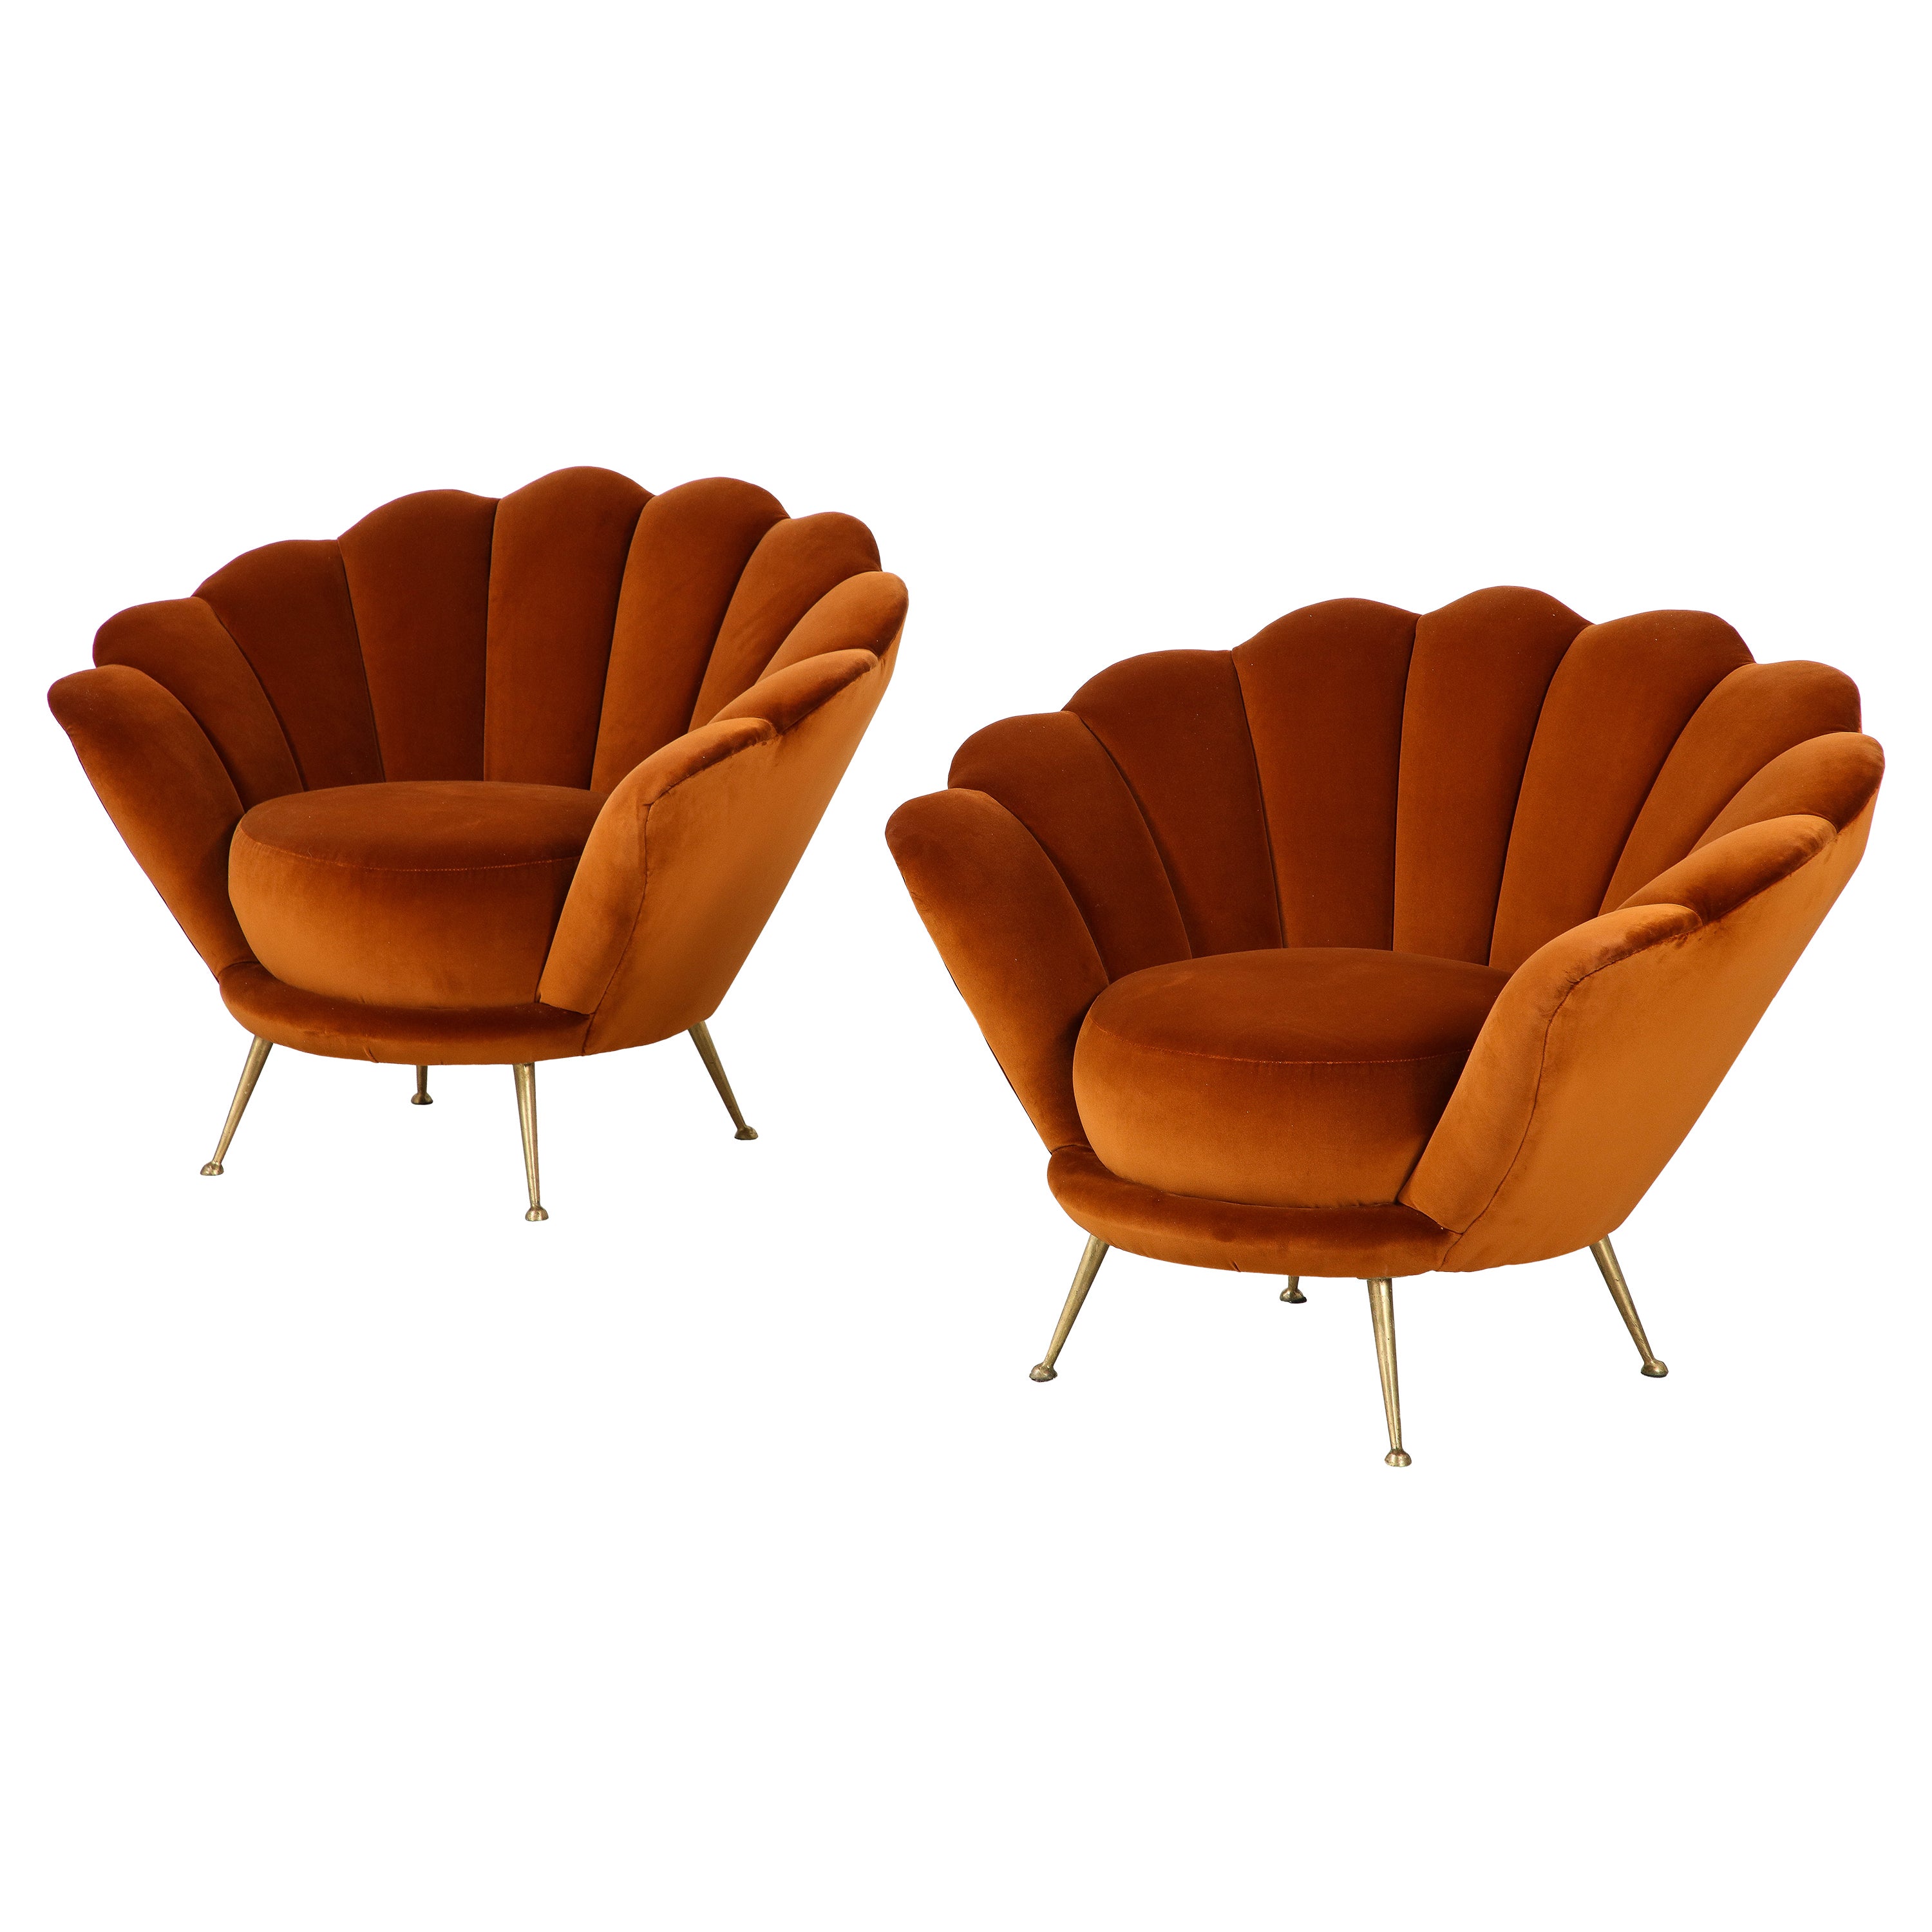 Pair of Italian 1950's Scalloped Shaped Velvet Lounge Chairs For Sale